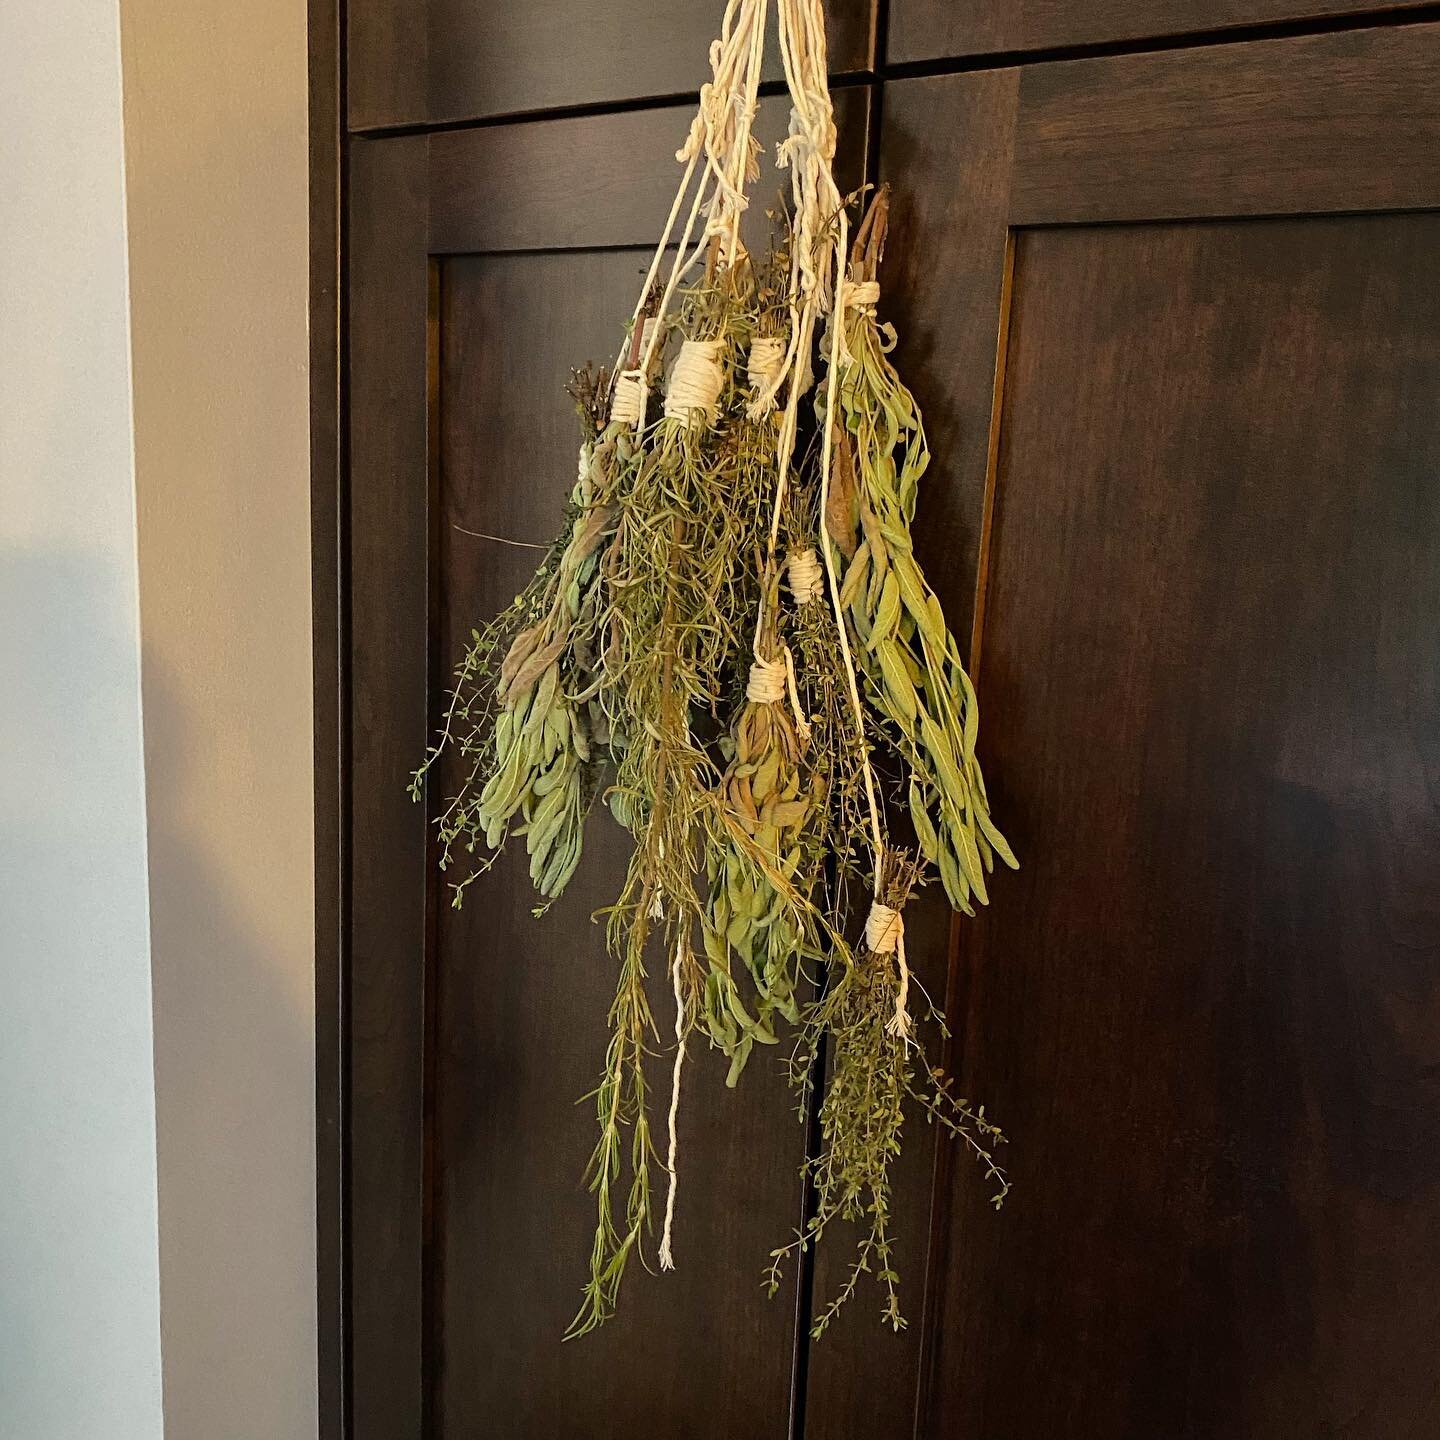 Herb drying gives me flashbacks to making Skyrim ingredient clutter :D